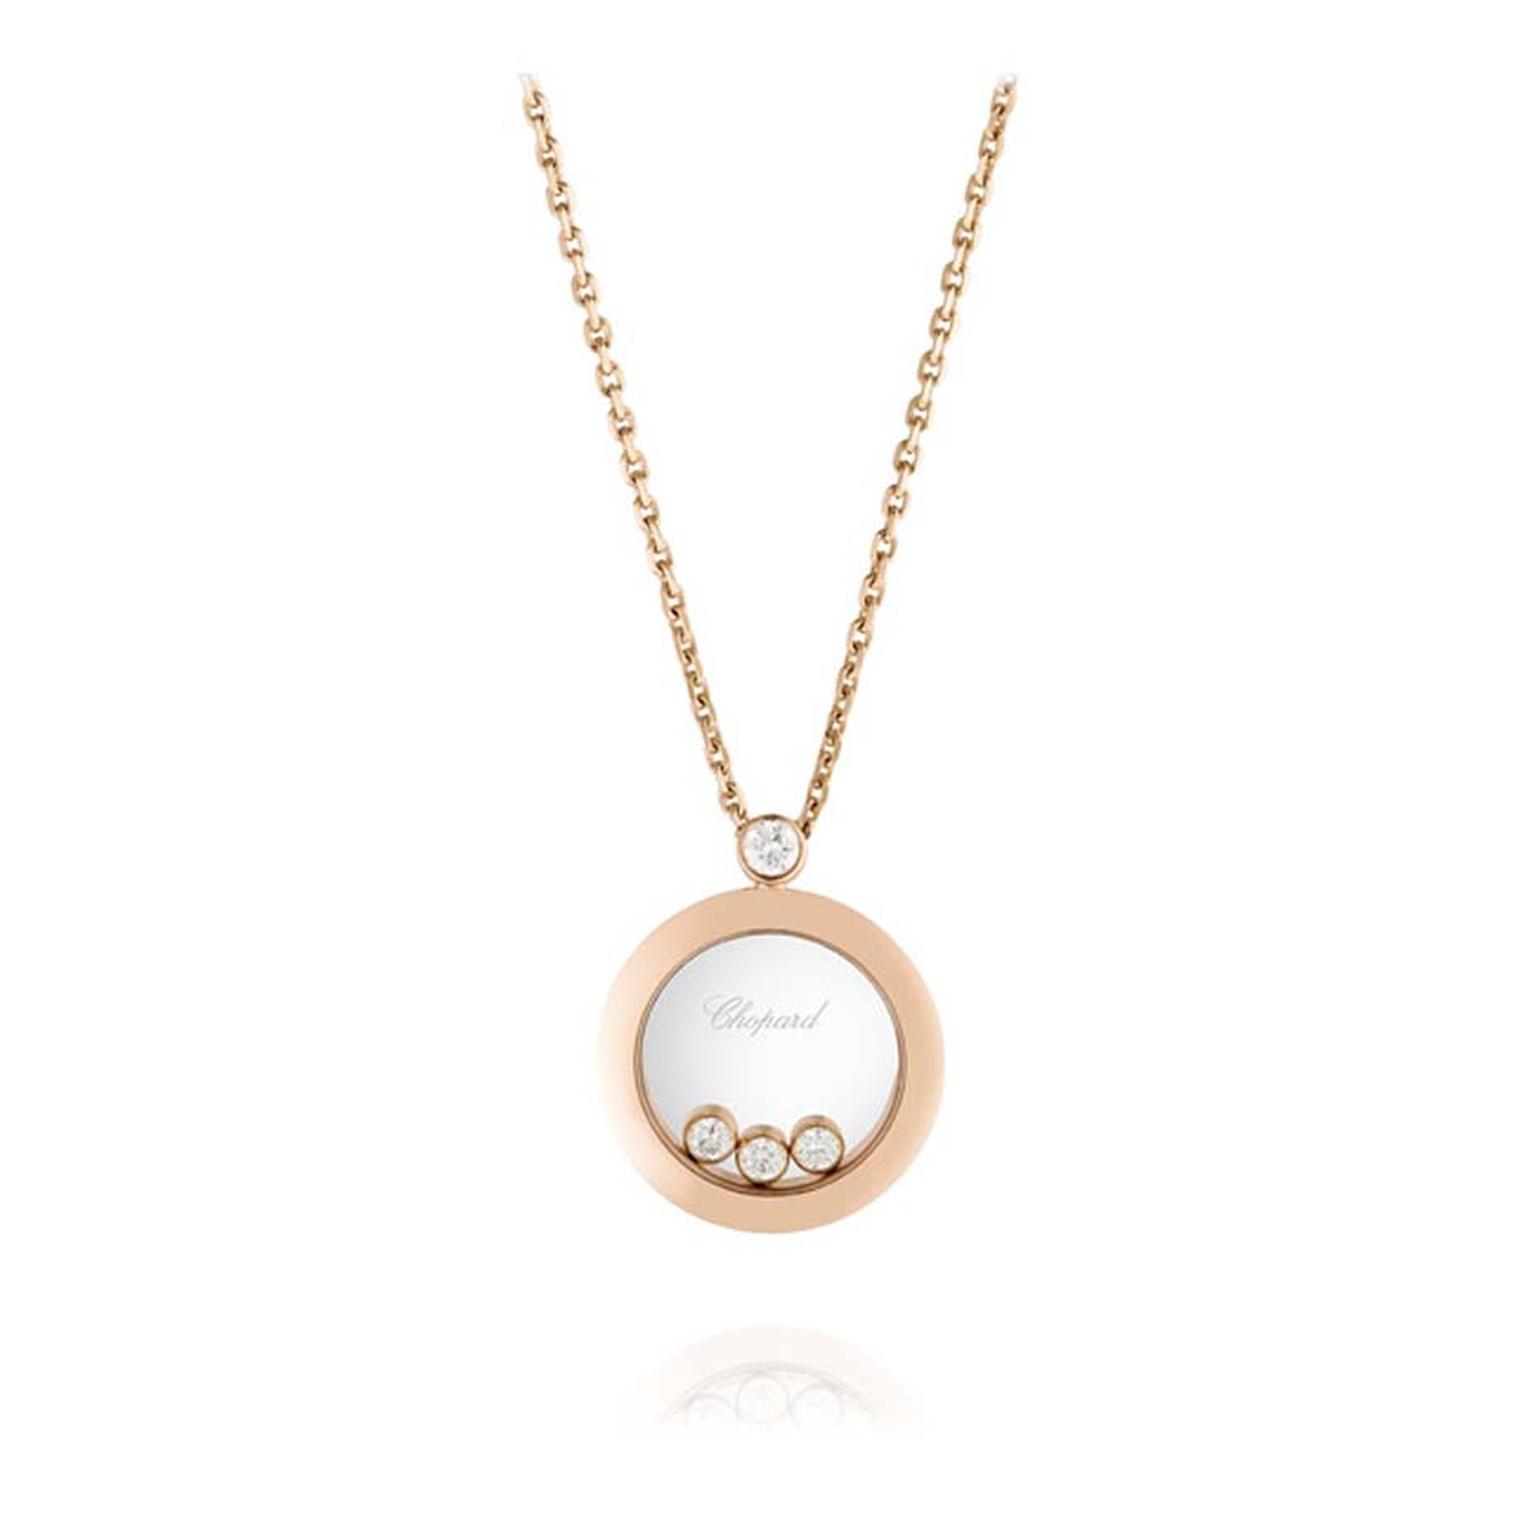 Chopard Happy Diamonds pendant, with three floating diamonds sat within a case of rose gold.